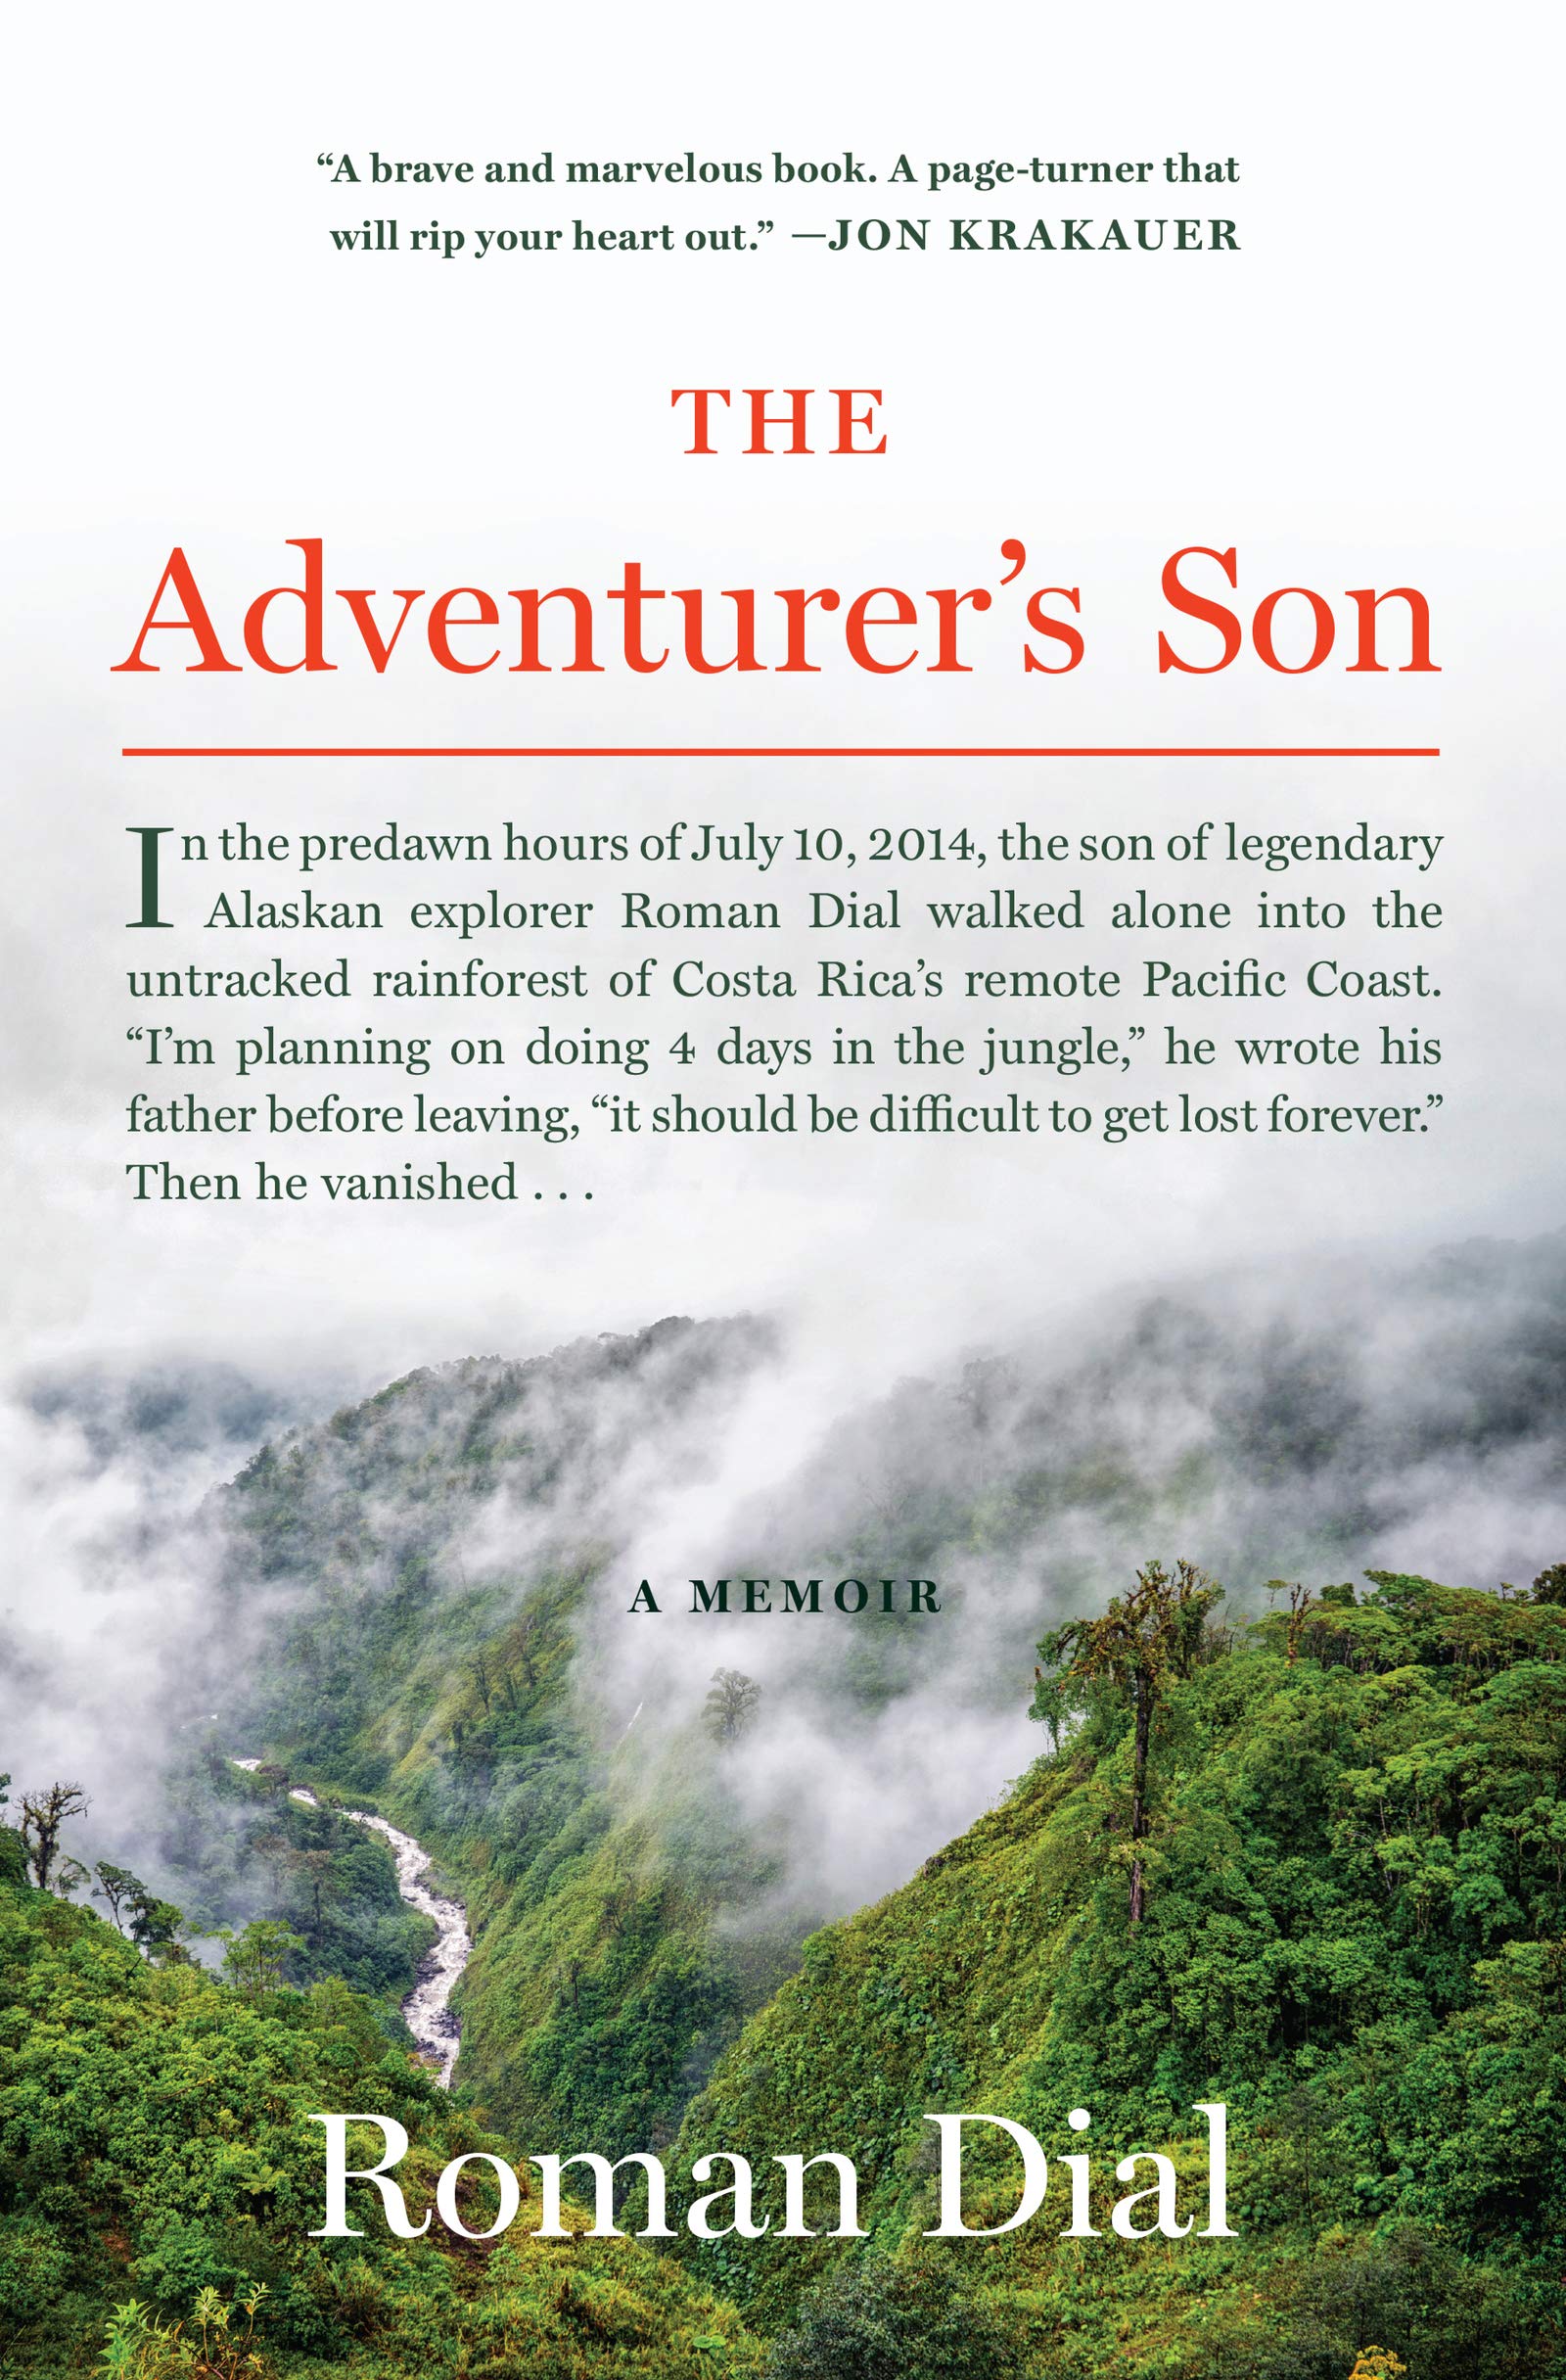 Image for "The Adventurer's Son"